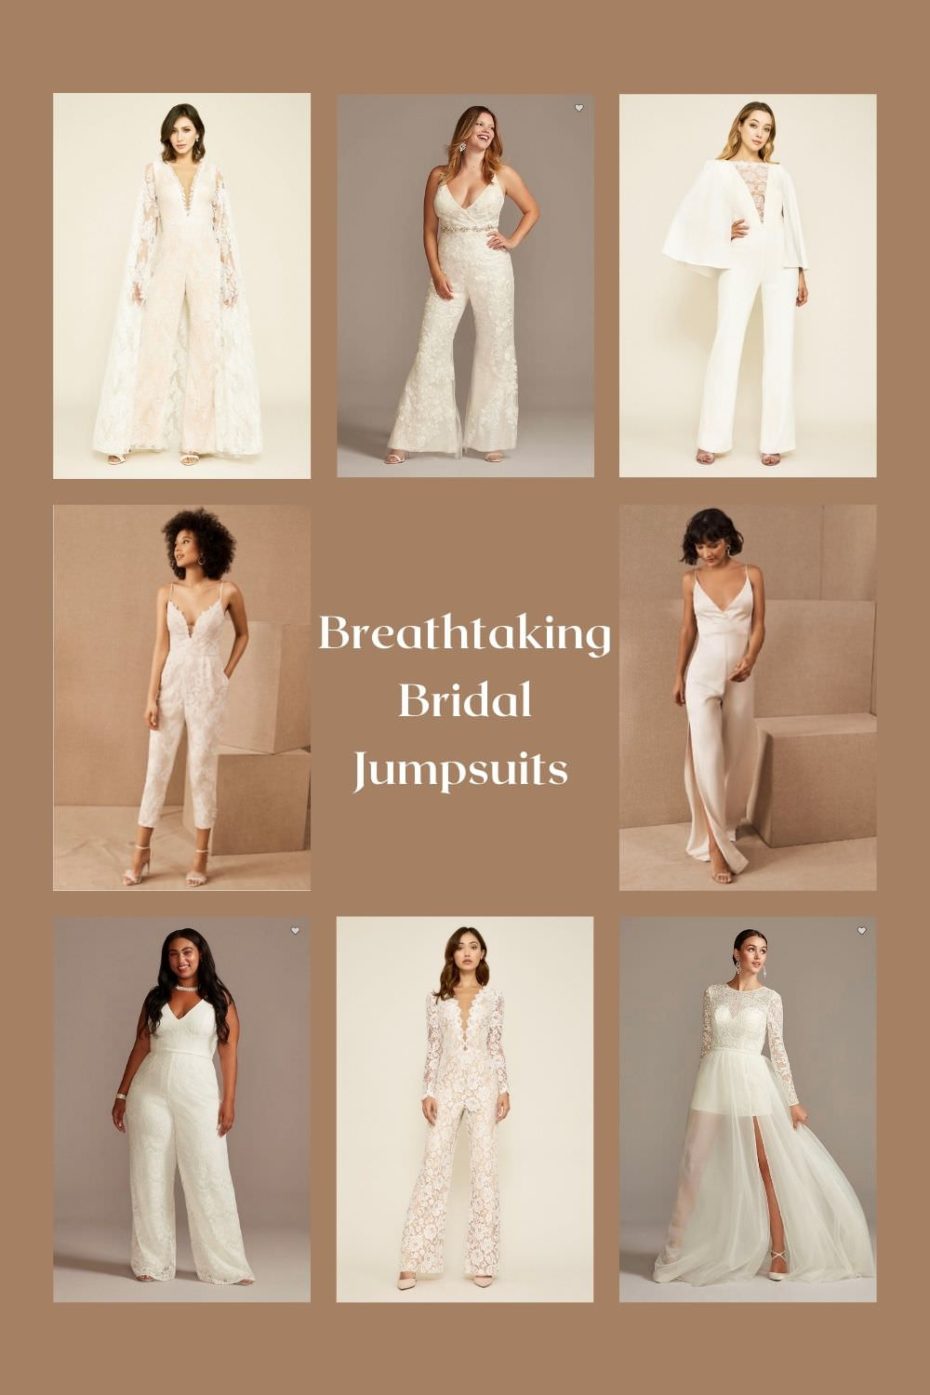 Breathtaking bridal jumpsuits from designers around the world